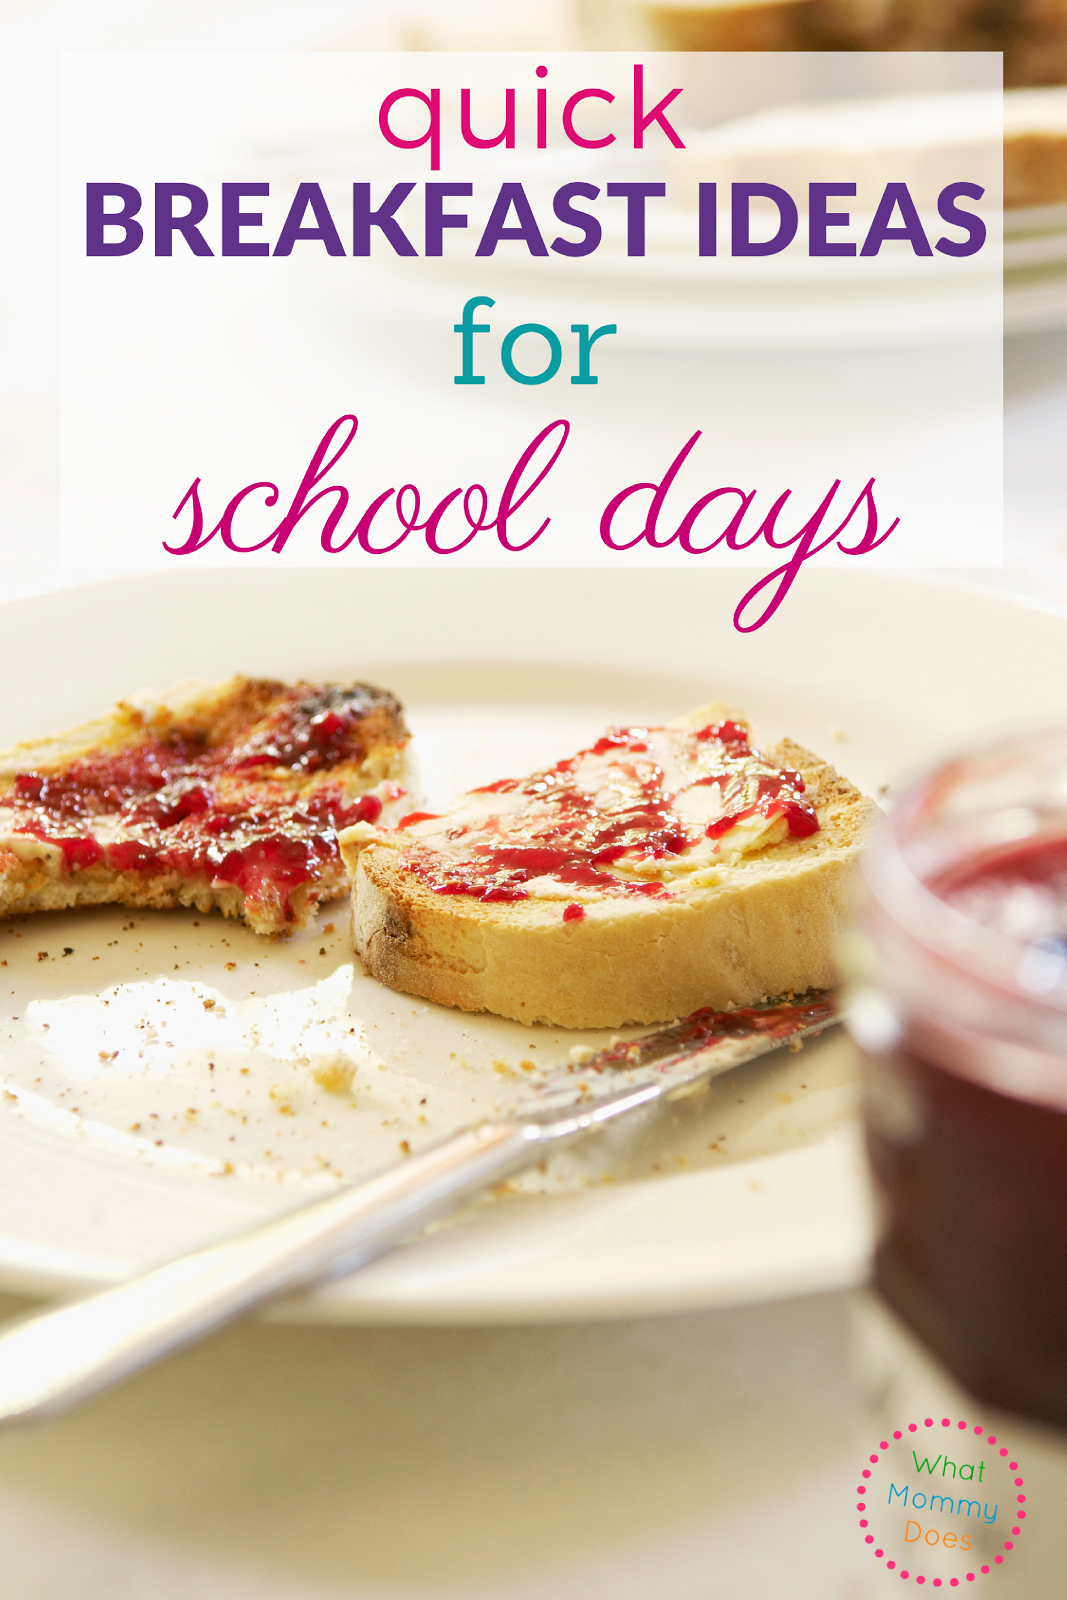 Quick Breakfast Ideas for School Days - What Mommy Does